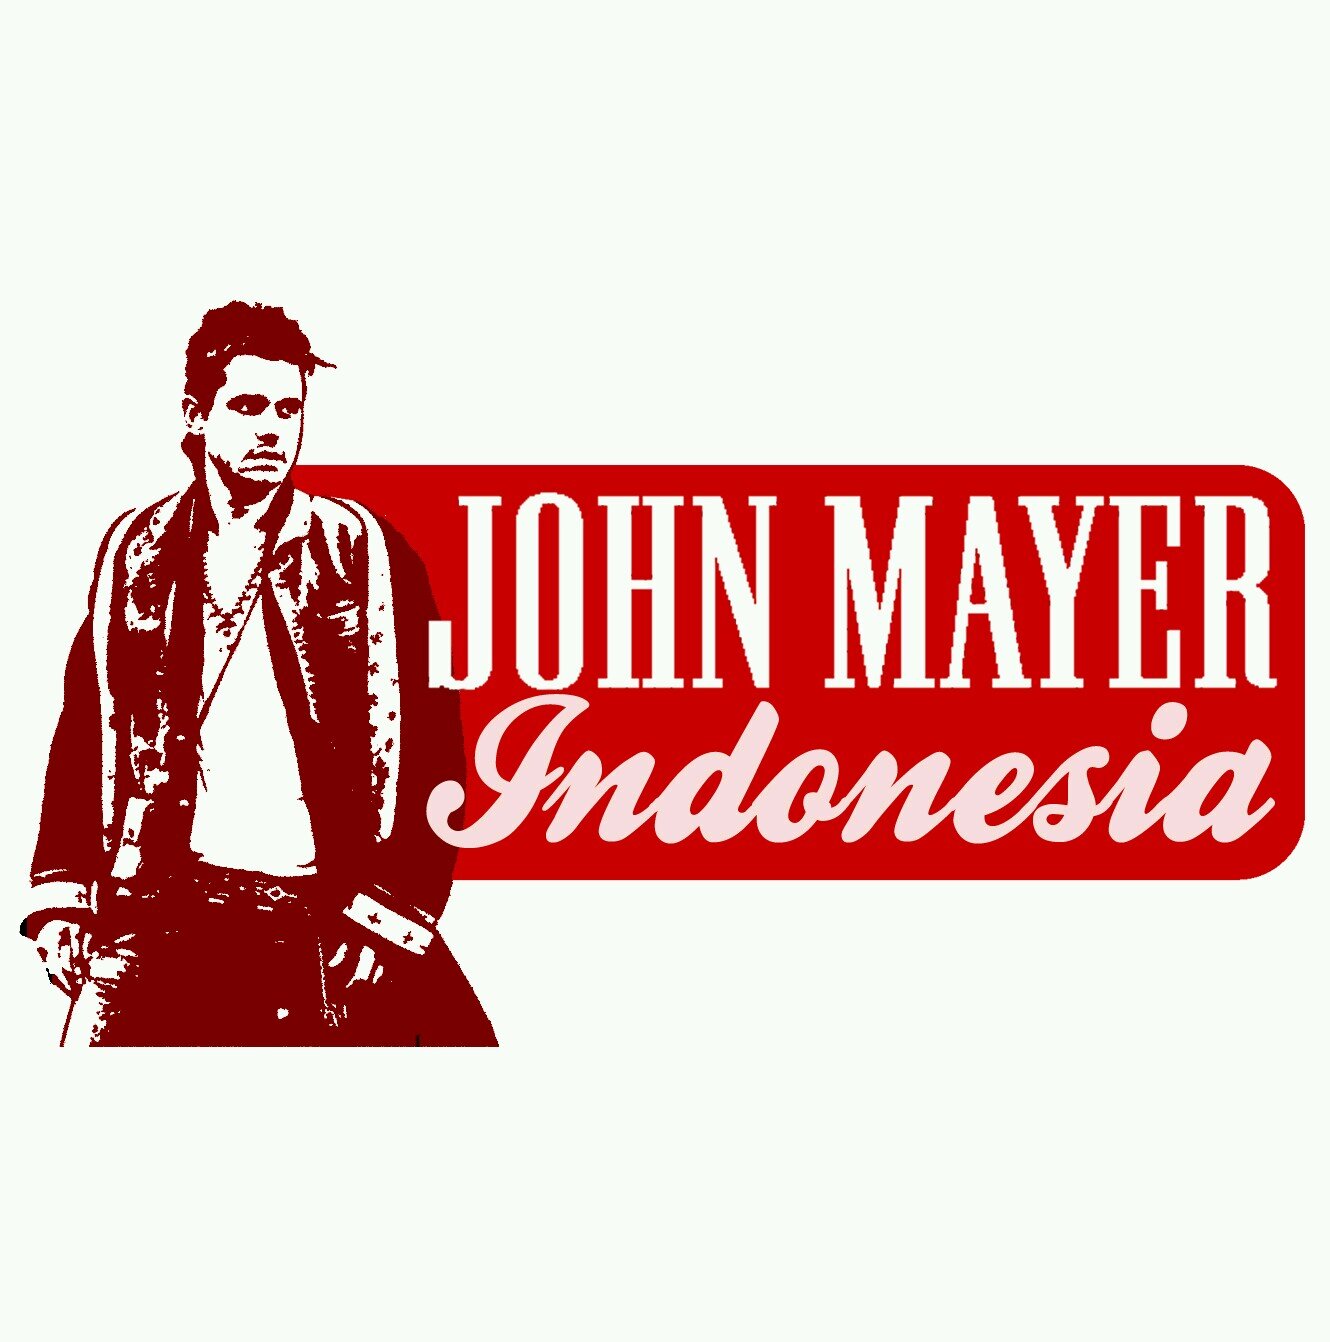 The first & the biggest @JohnMayer source and fan base in Asia. GOSSIP FREE. Get 'Love on the Weekend' now: https://t.co/rVKr962j2U #JohnMayerforIndonesia